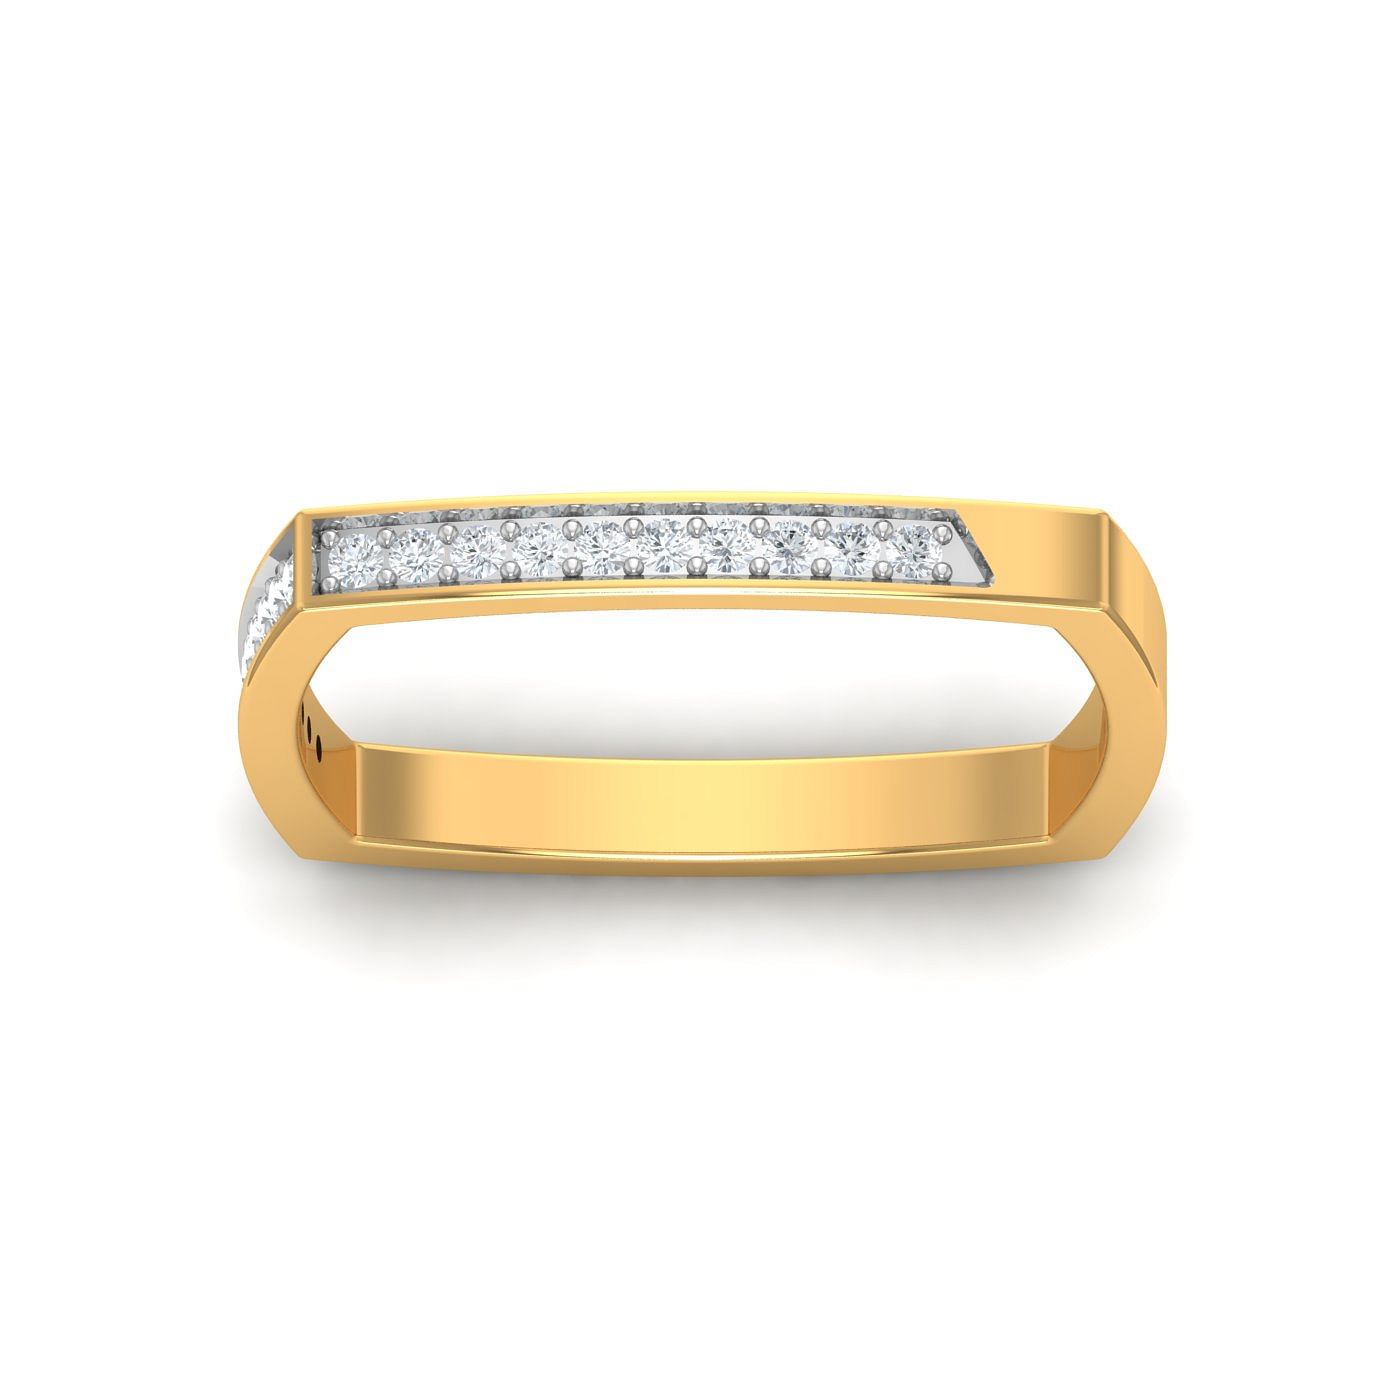 Square Design Yellow Gold Diamond Ring Band For Women